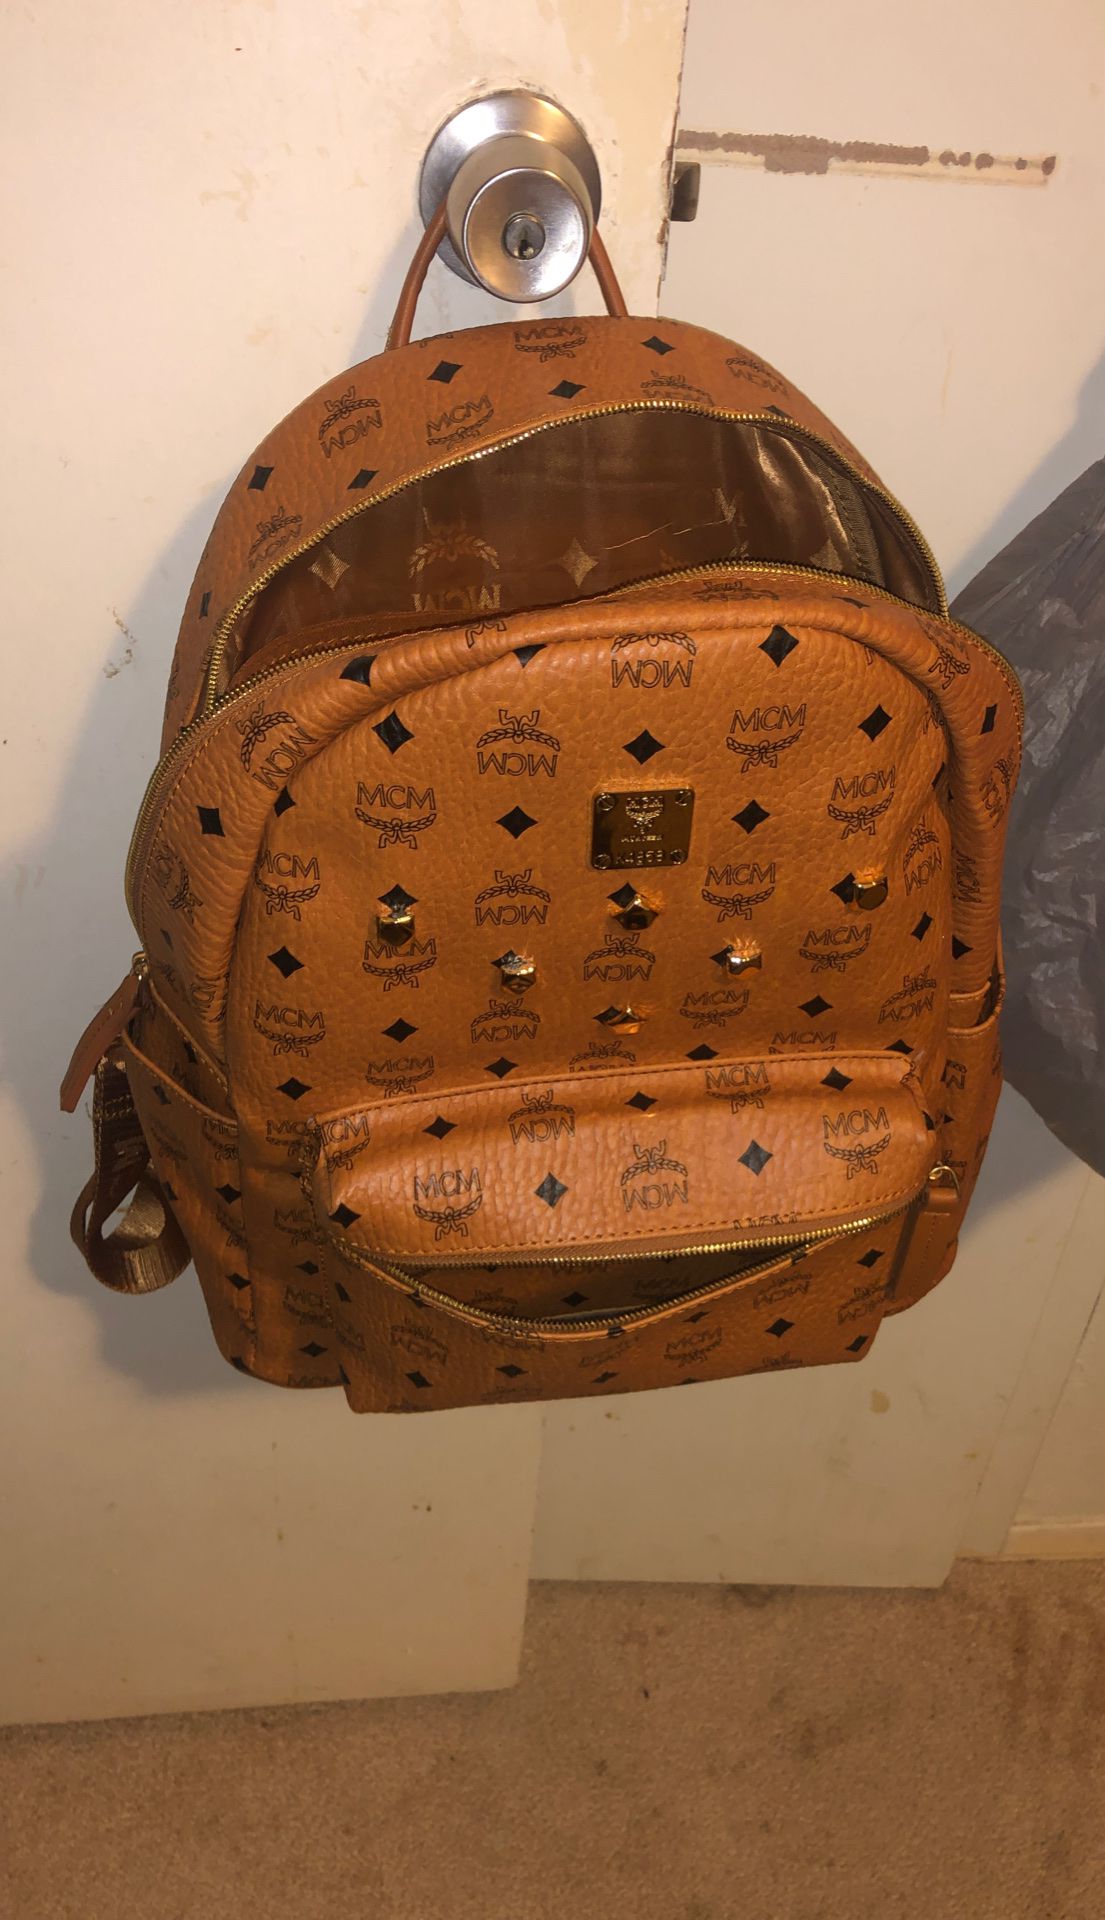 Authentic MCM backpack and Belt